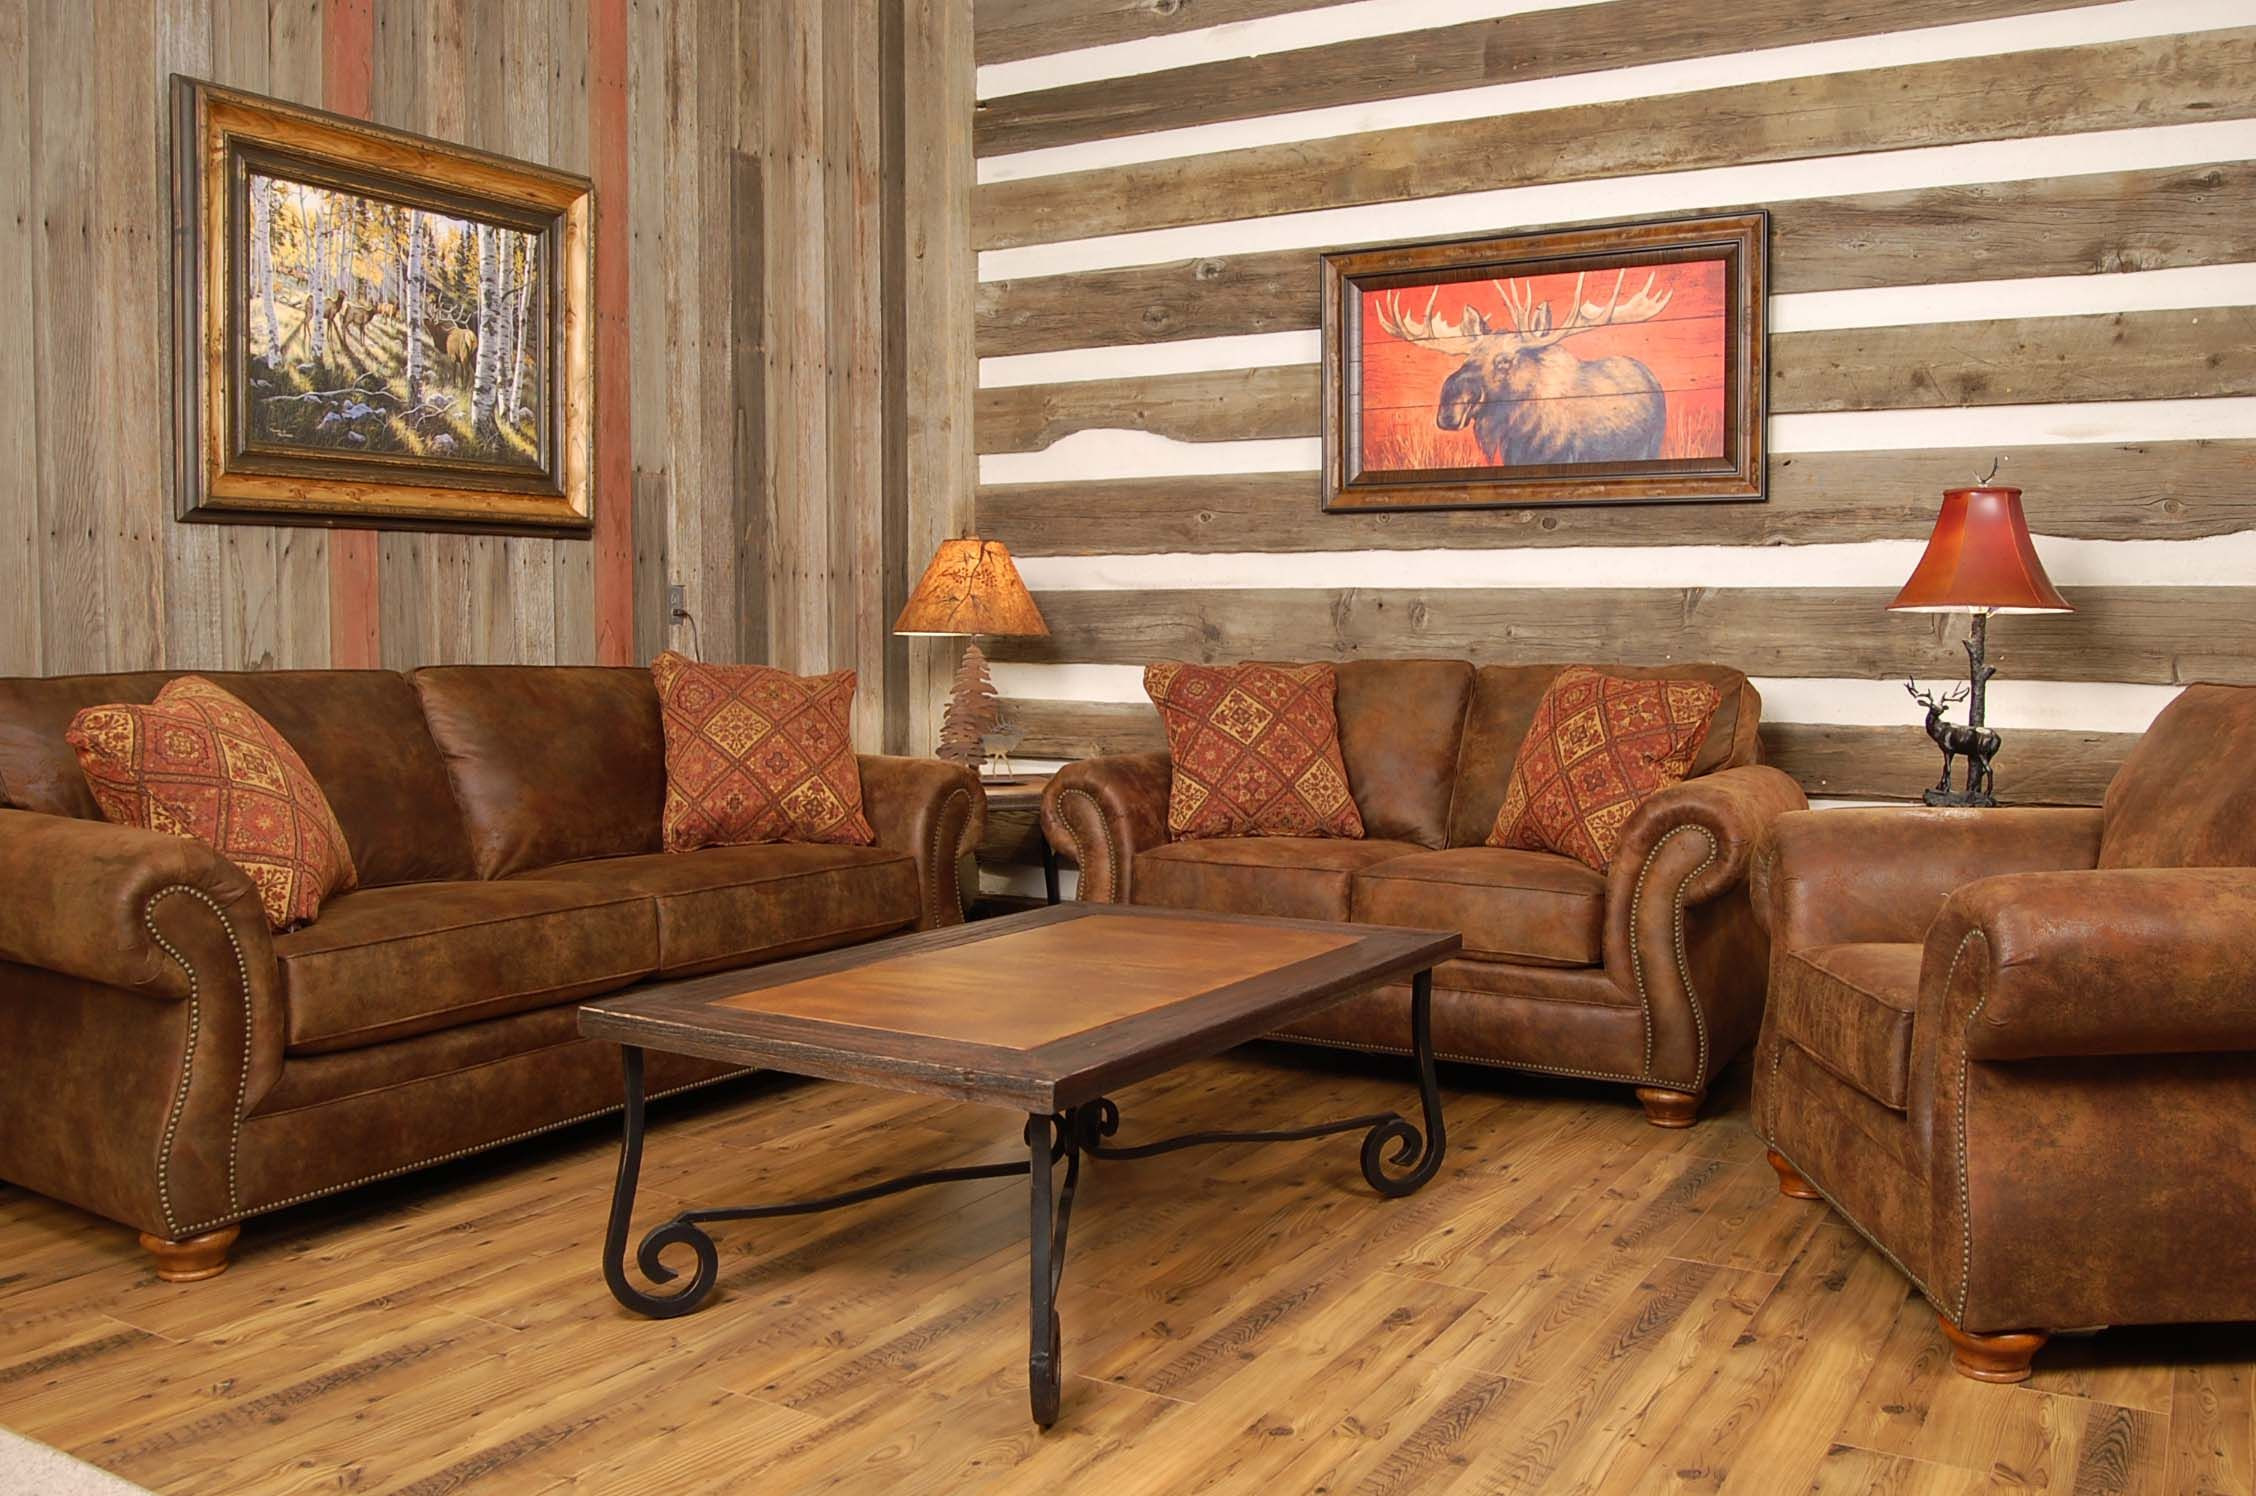 Rustic Living Room Furniture Sets
 A Living Room Makeover For Less Home Decor